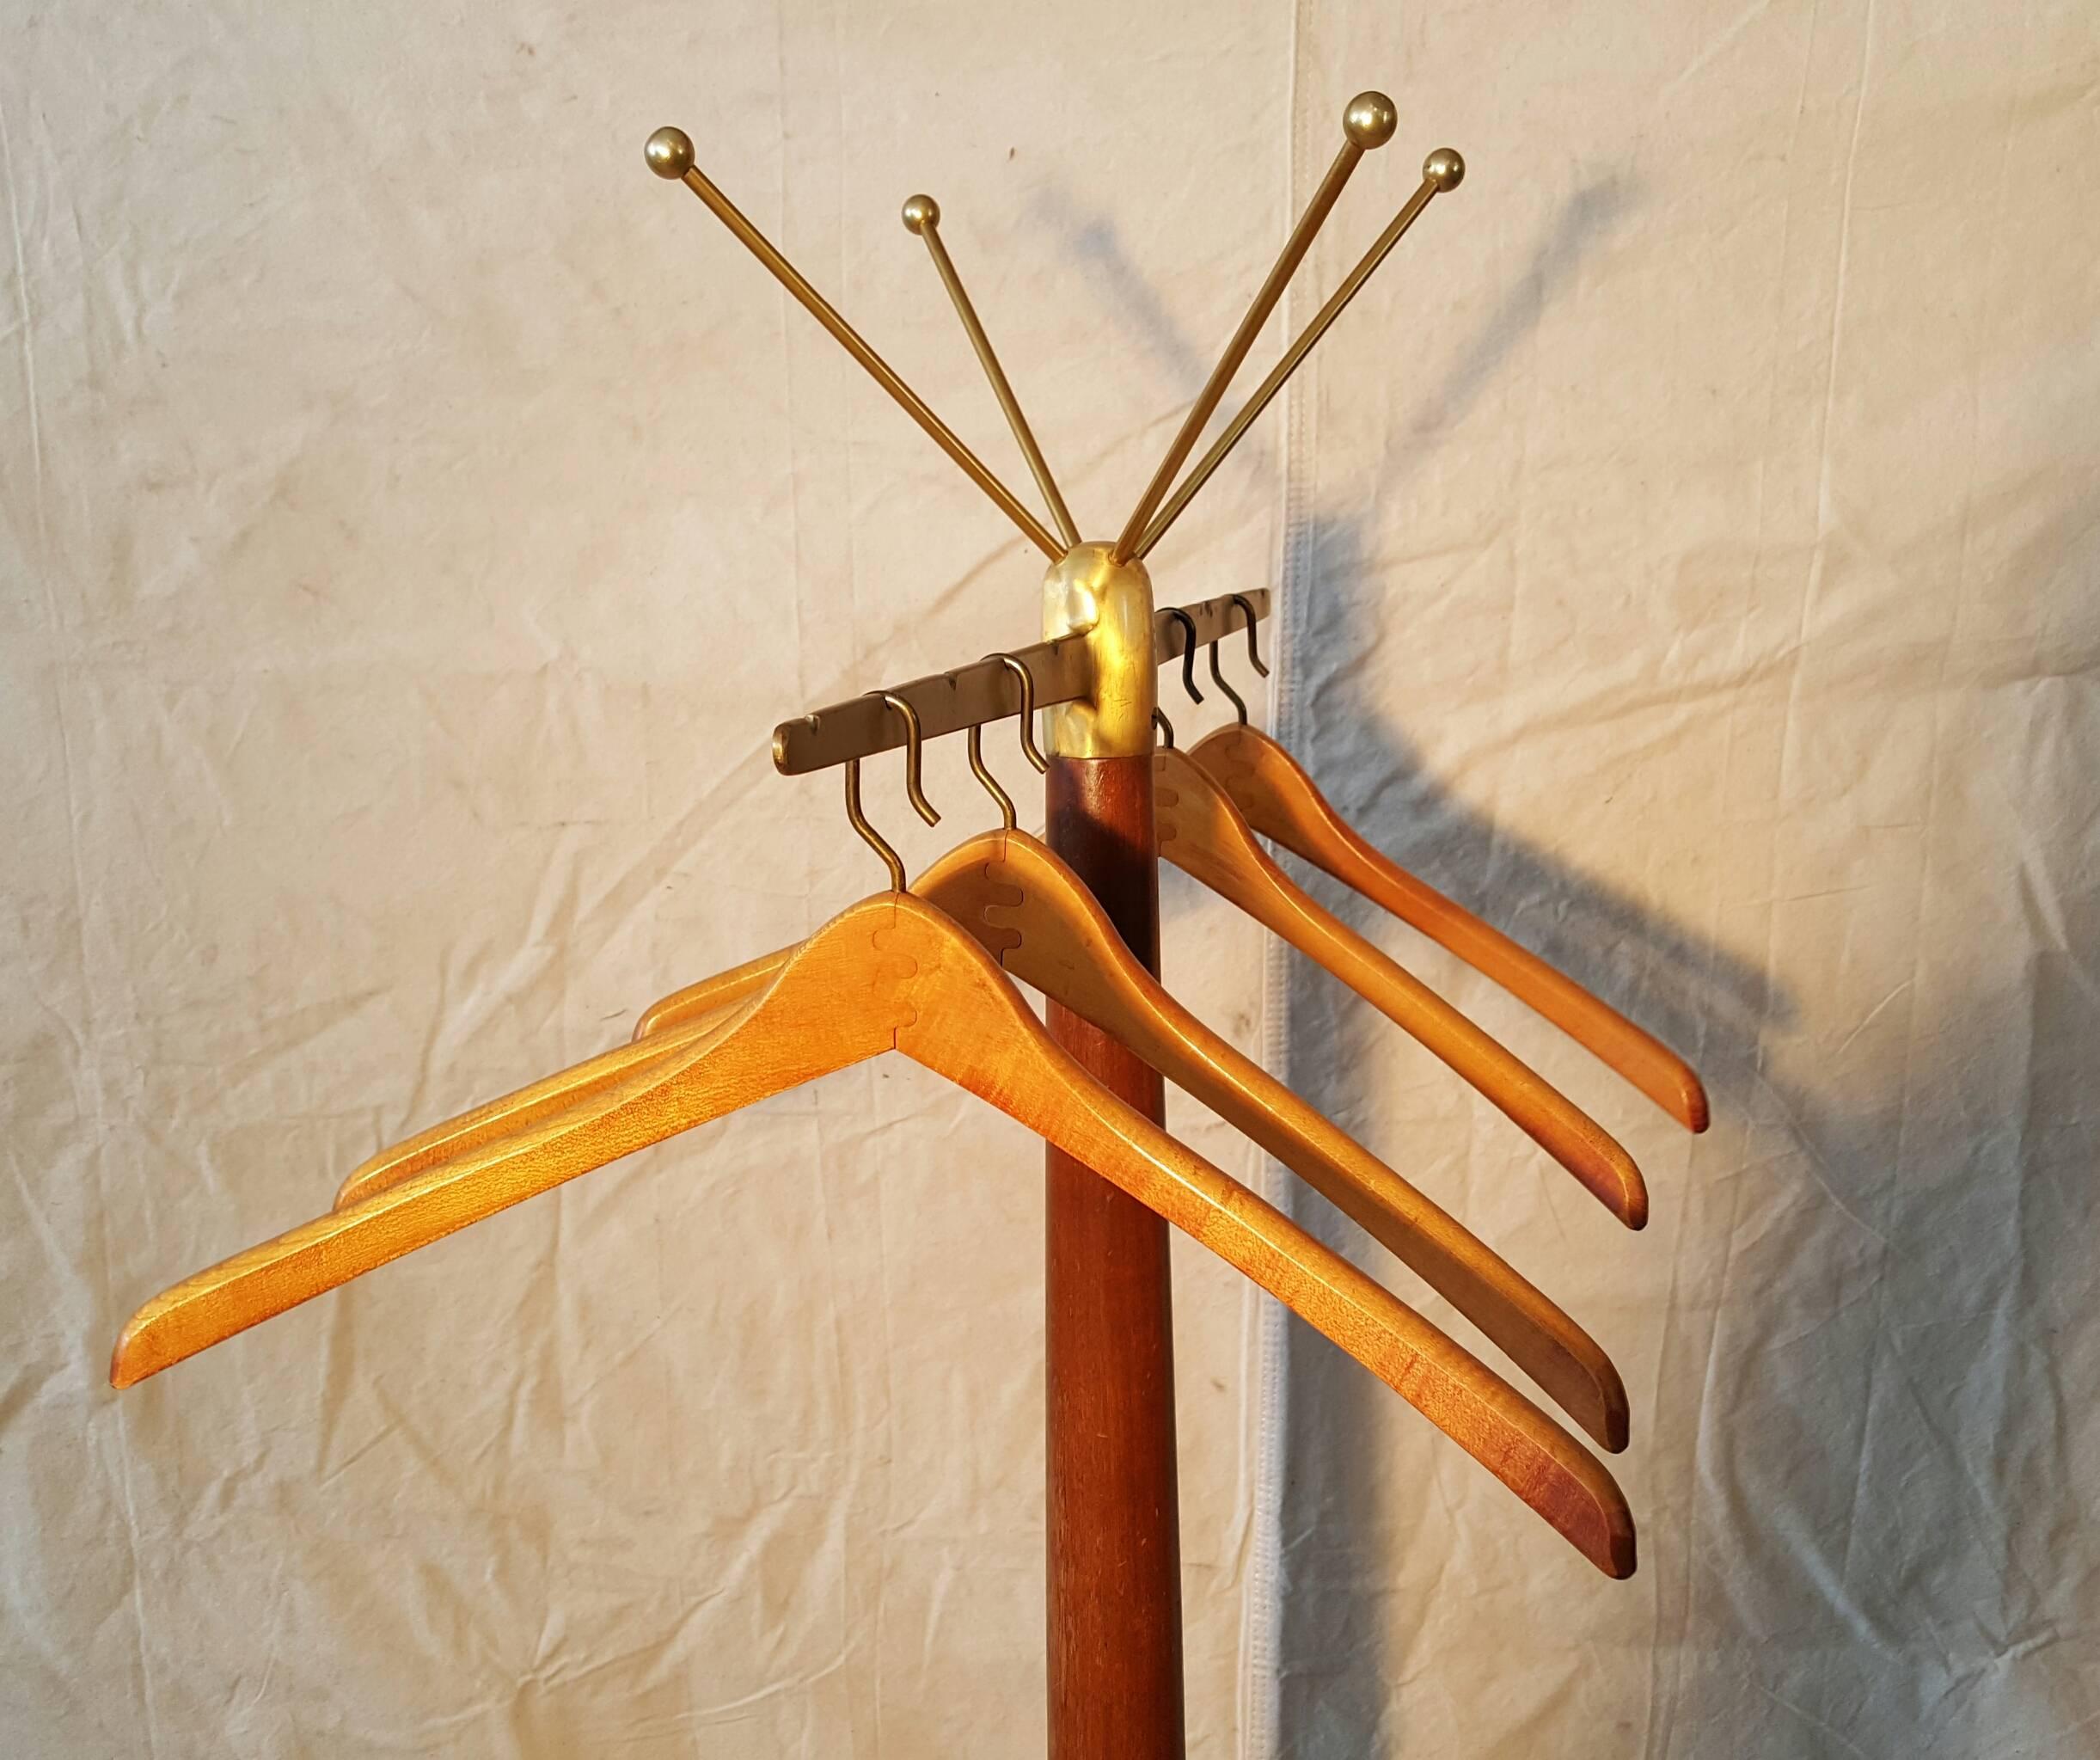 Elegant coat stand in the manner of Gio Ponti with solid brass four legged base, Whimsical brass ball feet. Top, mirror image of base, brass arms, balls, retains four original walnut and brass hangers, interesting joinery solid walnut body with